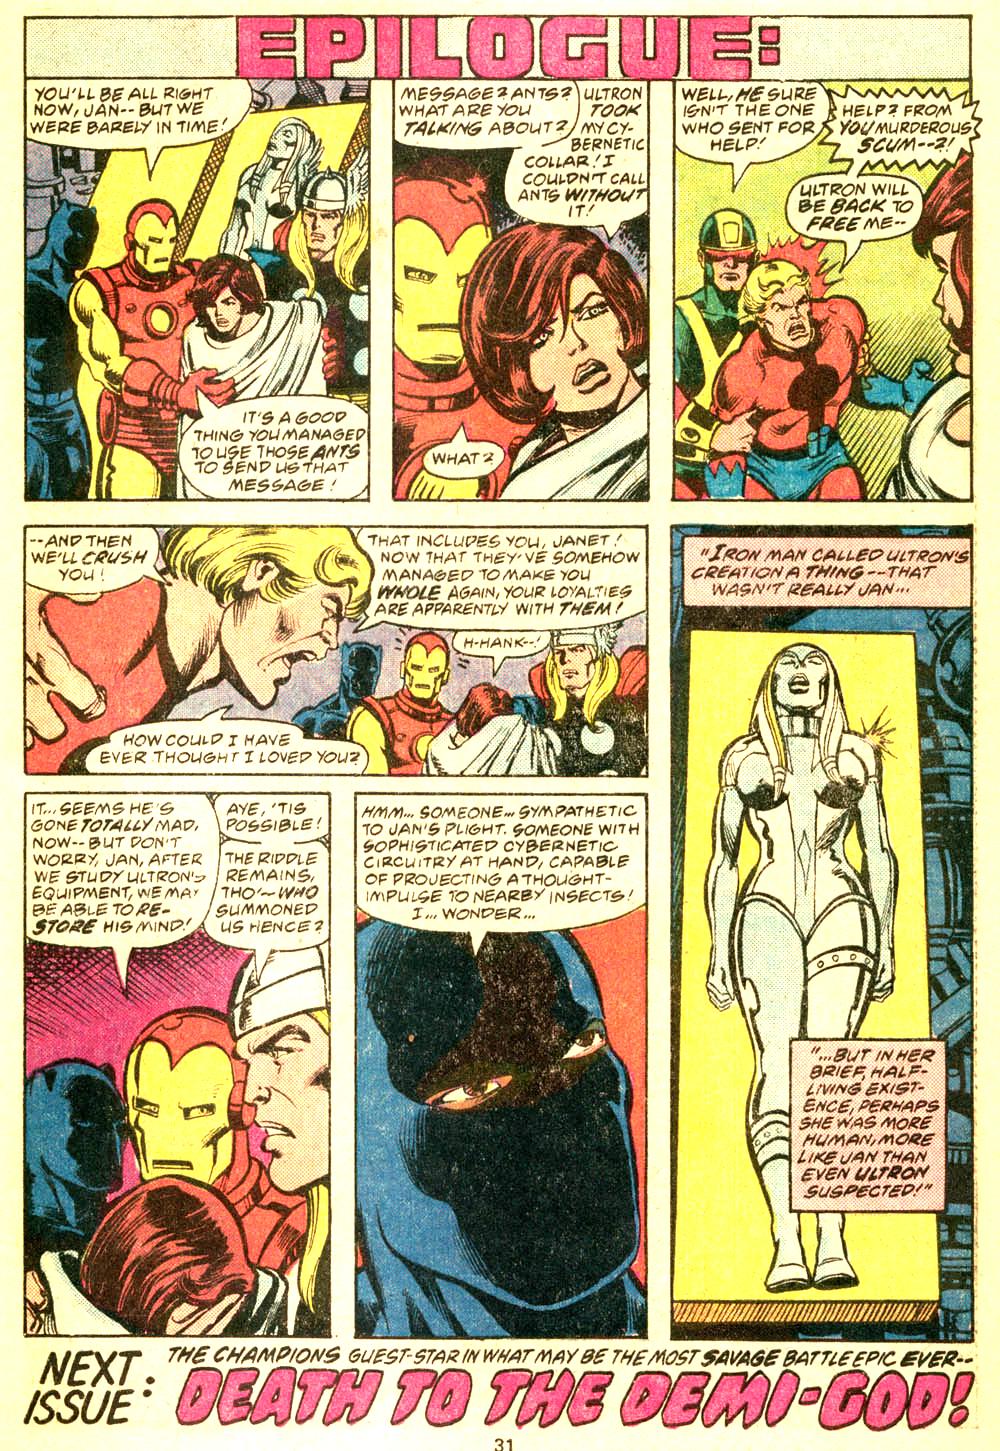 The Avengers (1963) 162 Page 17